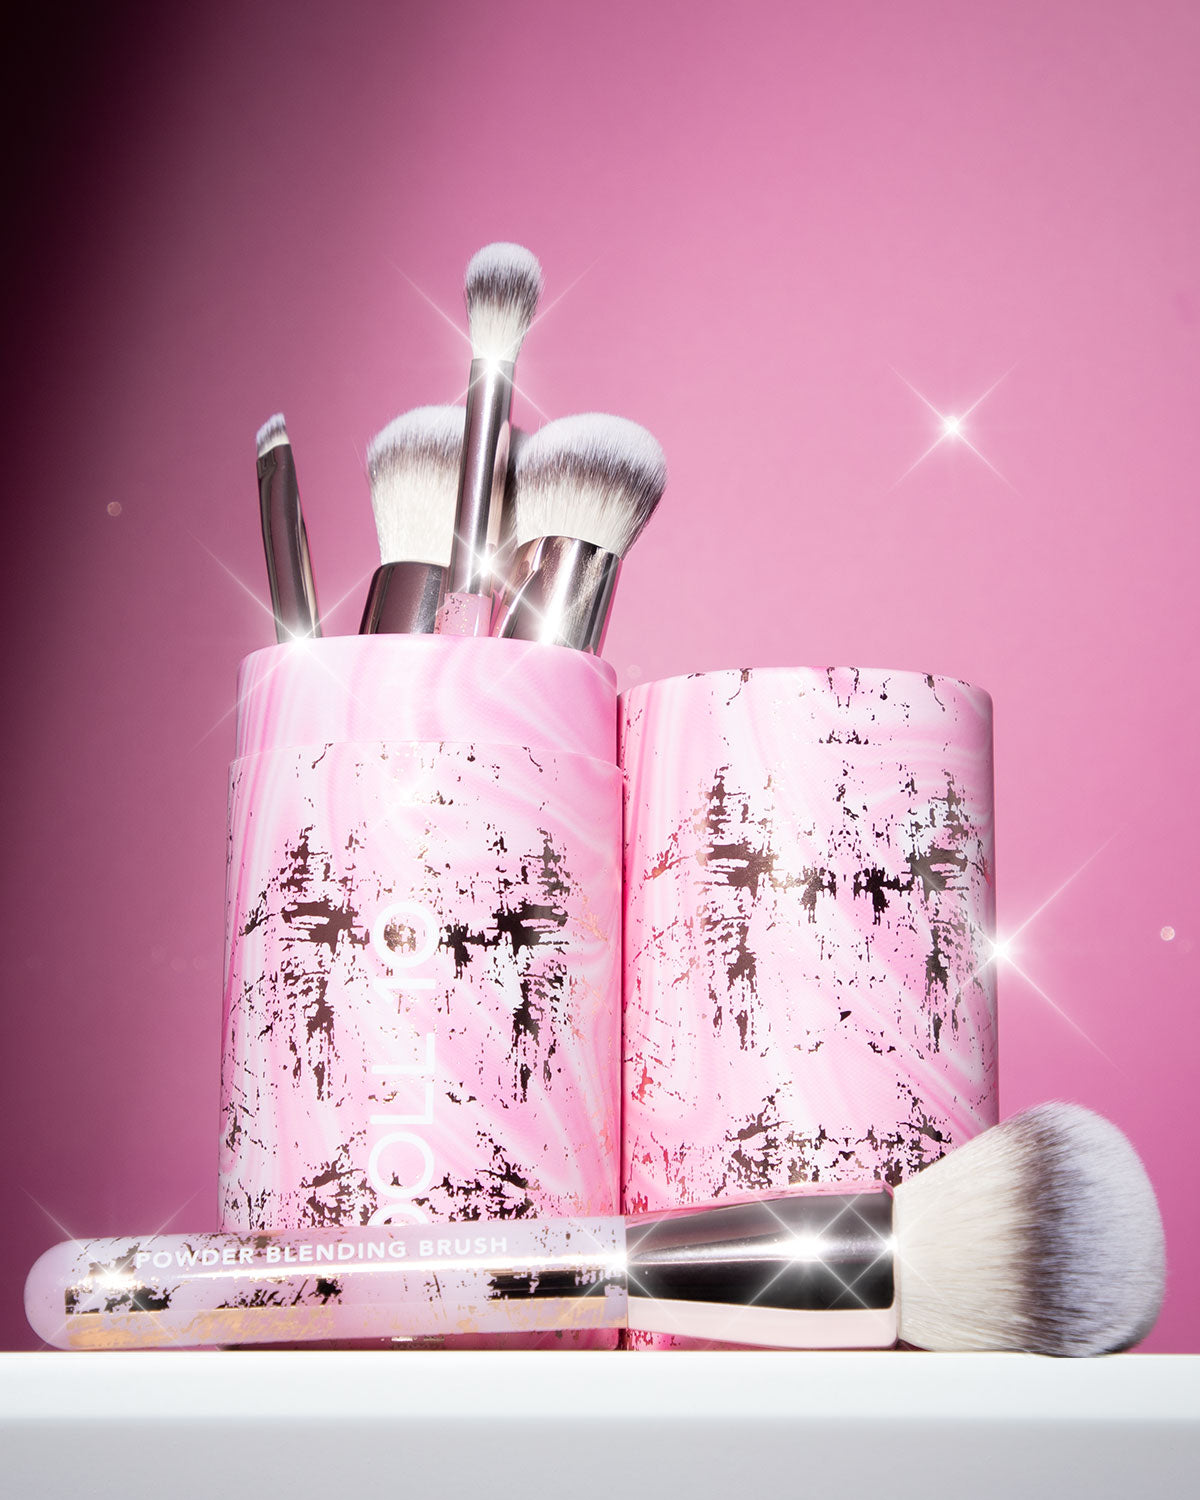 Blissfully Blended 10 – Brush Collection Beauty Doll 5 Piece